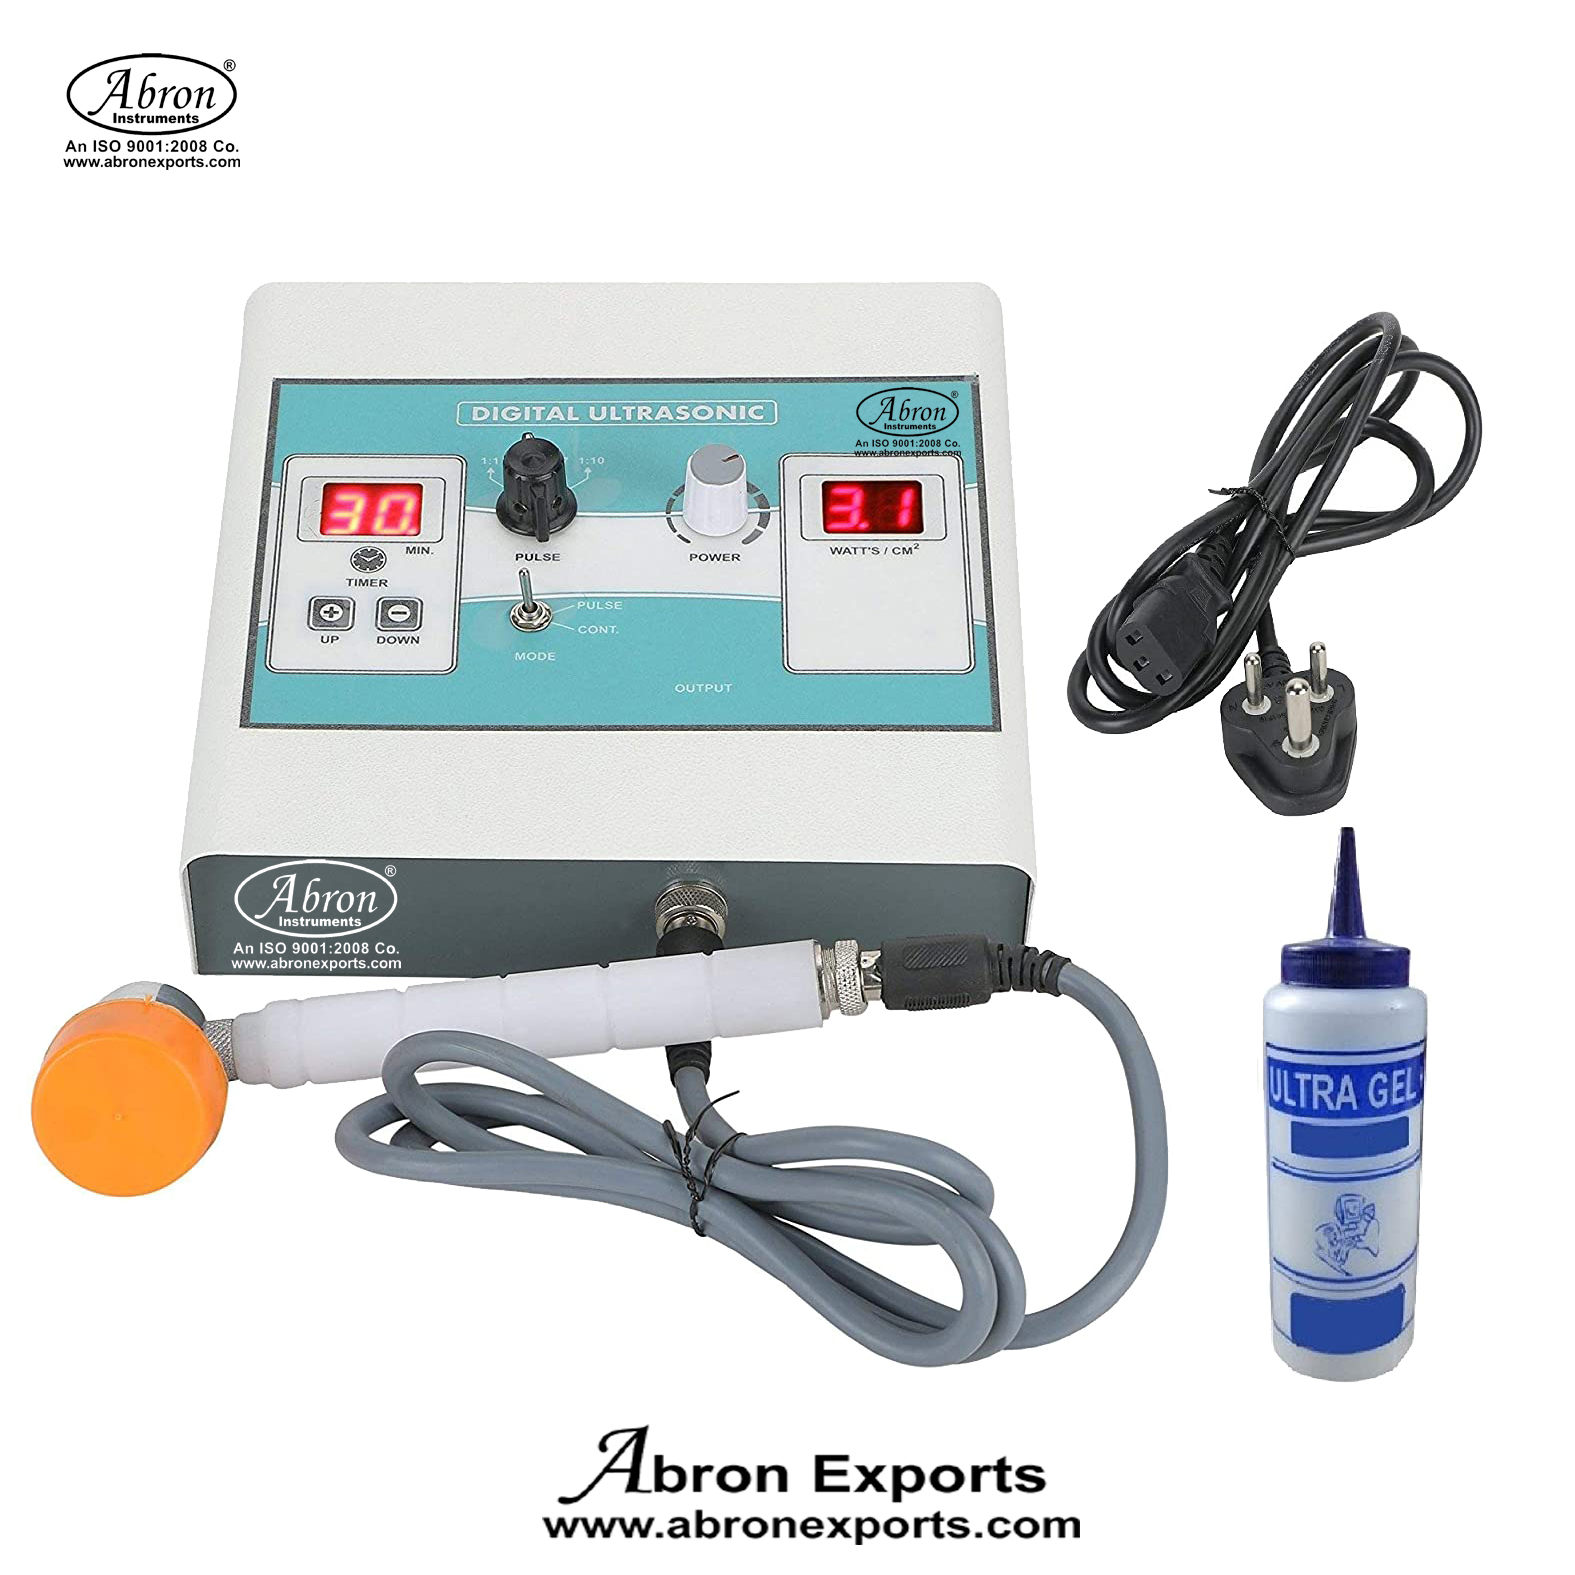 Physiotherapy Stimulator Digi Ultrasonic Machine For Pain Relief Electrotherapy Hospital Medical Clinical Abron ABM-1922U 